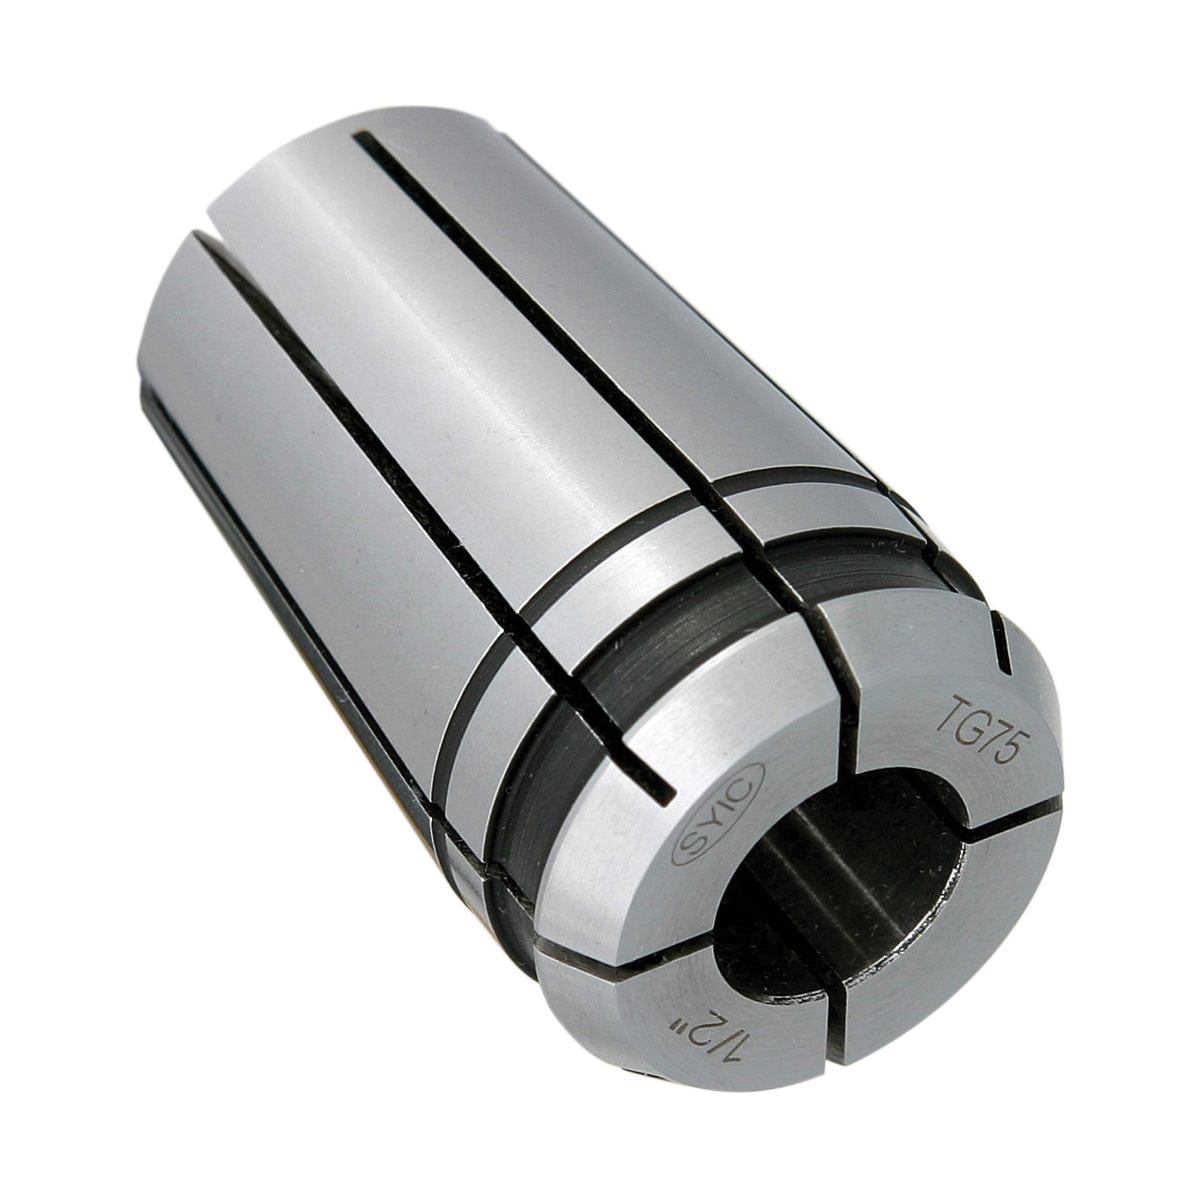 TG75 5/16" COLLET